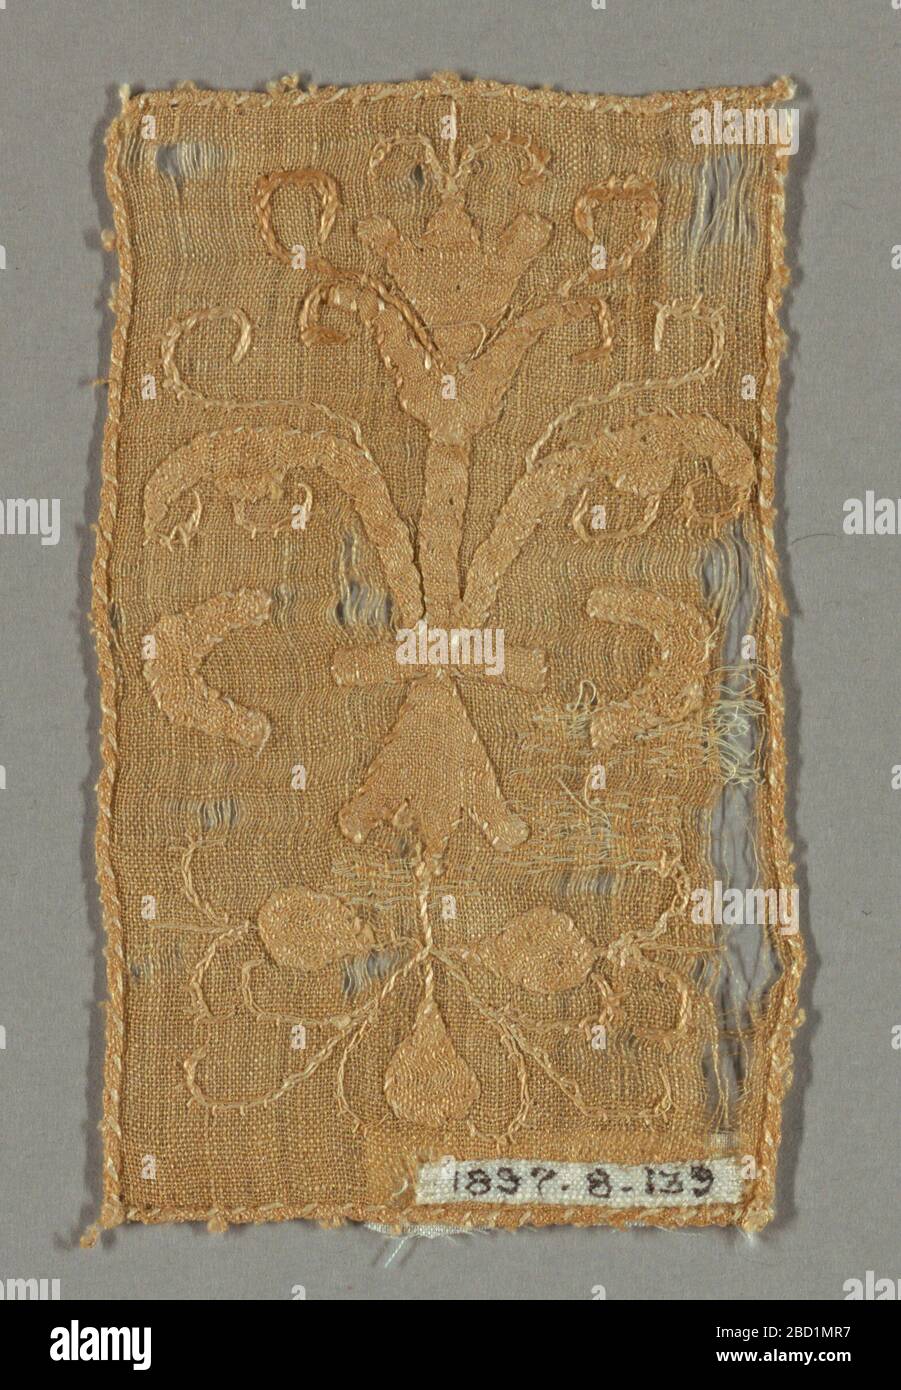 Fragment. Research in ProgressLight brown rectangular fragment in a conventionalized design of scrolling leaves and floral forms. Fragment Stock Photo